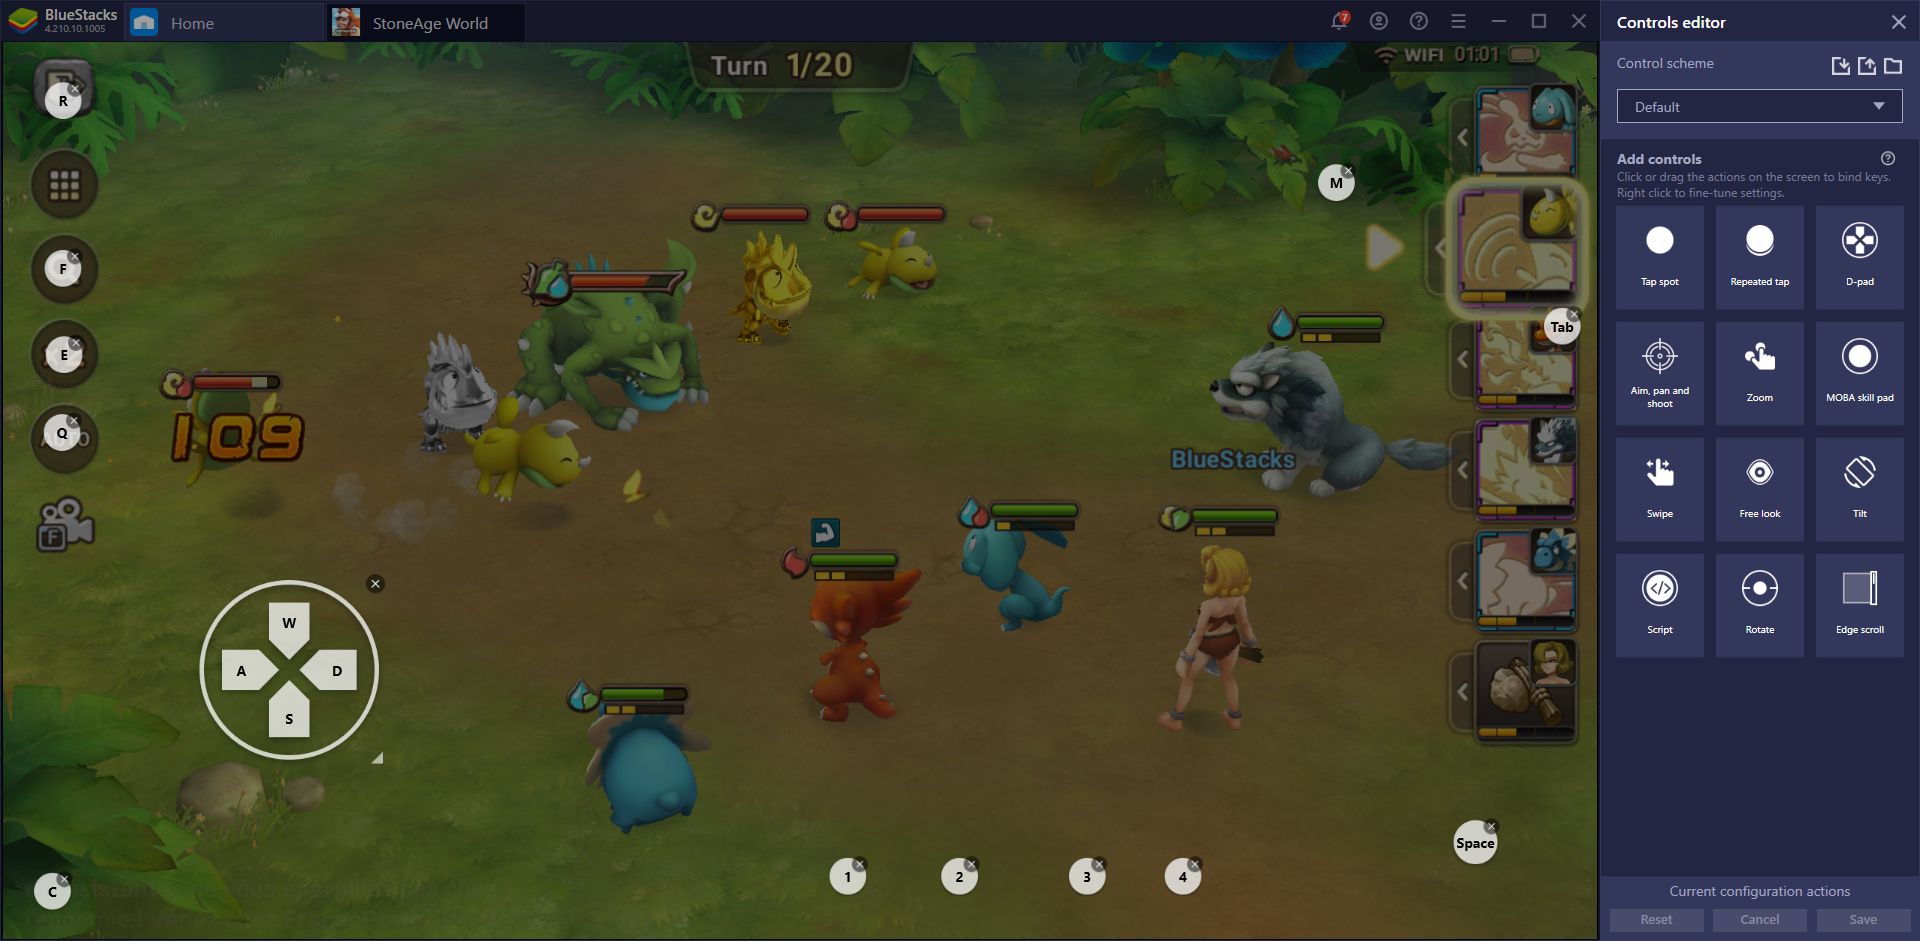 How to Play StoneAge World on PC With BlueStacks